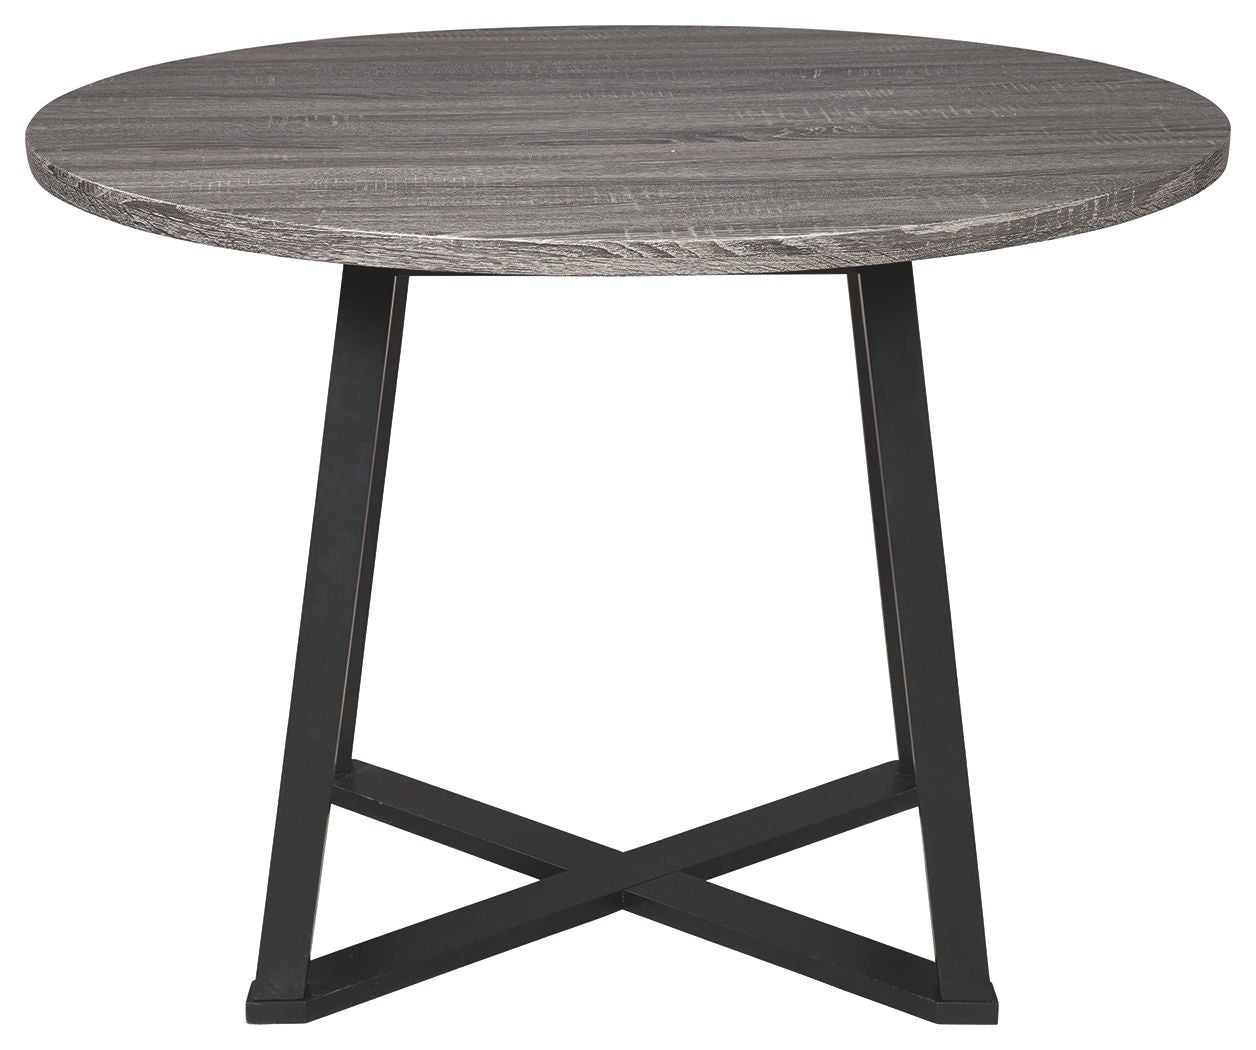 Centiar - Black / Gray - Round Dining Room Table